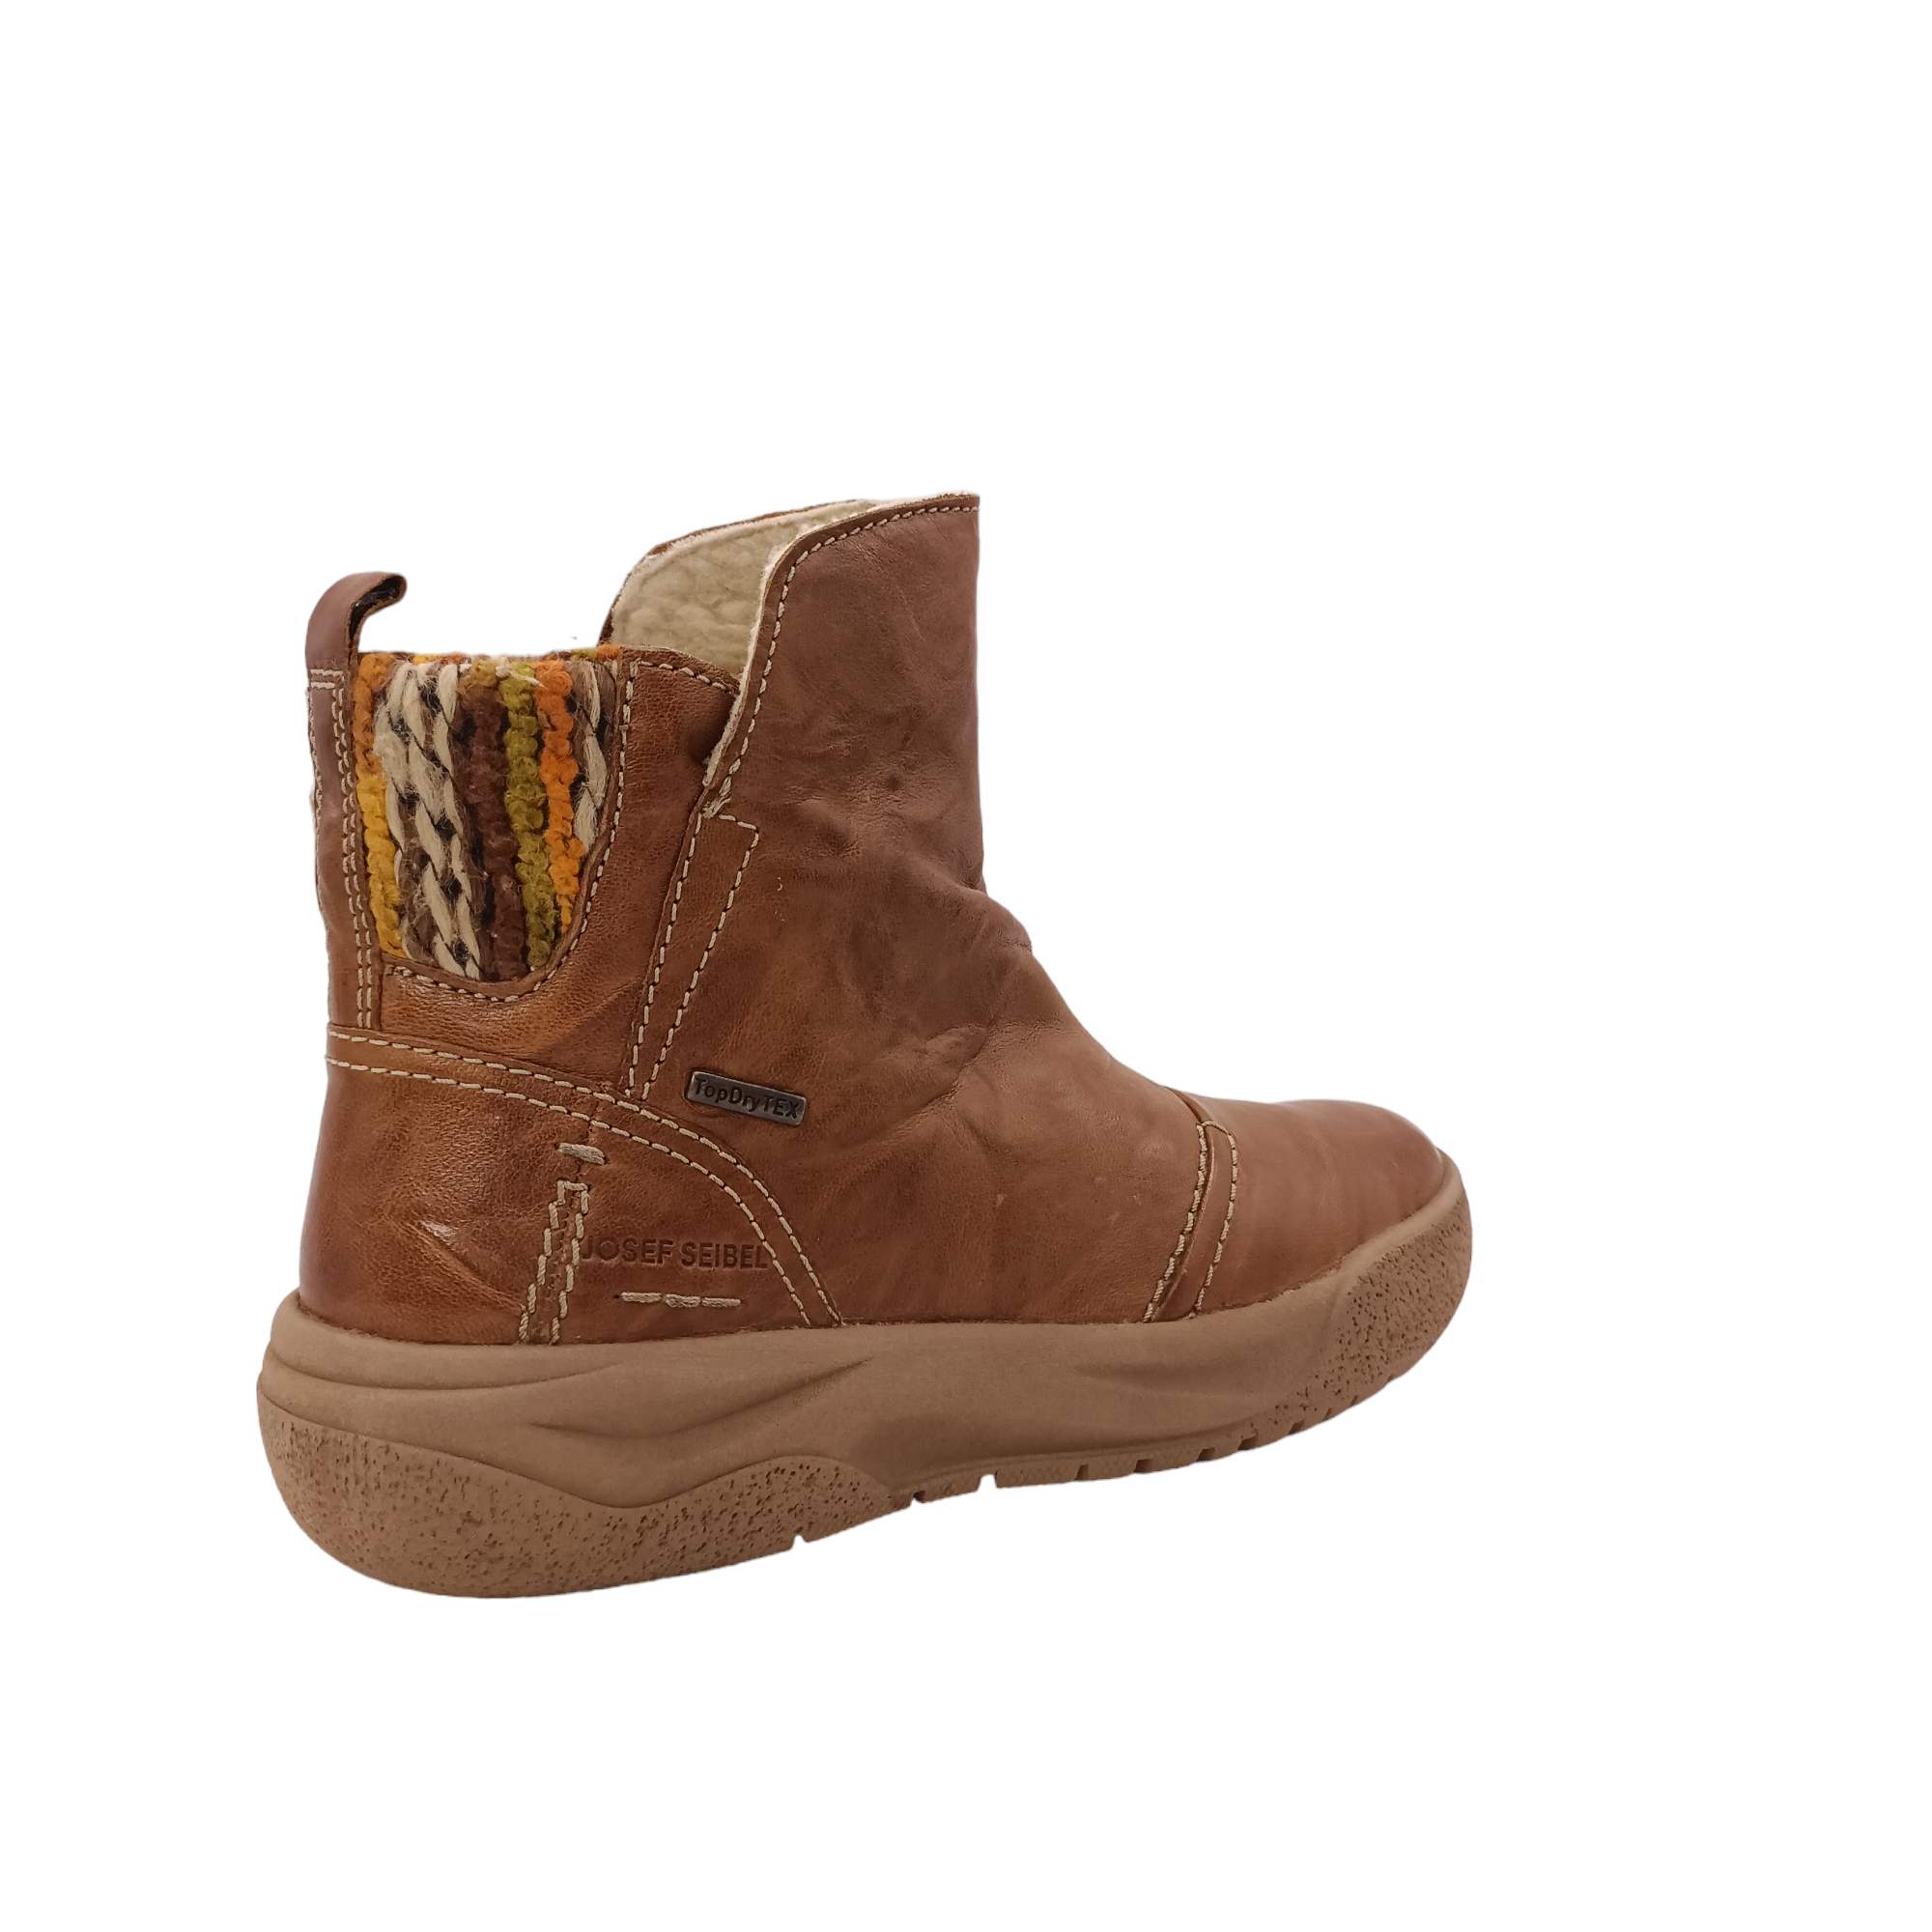 Shop Alina 51 Josef Seibel - with shoe&me - from Josef Seibel - Boots - boots, Winter, Womens - [collection]